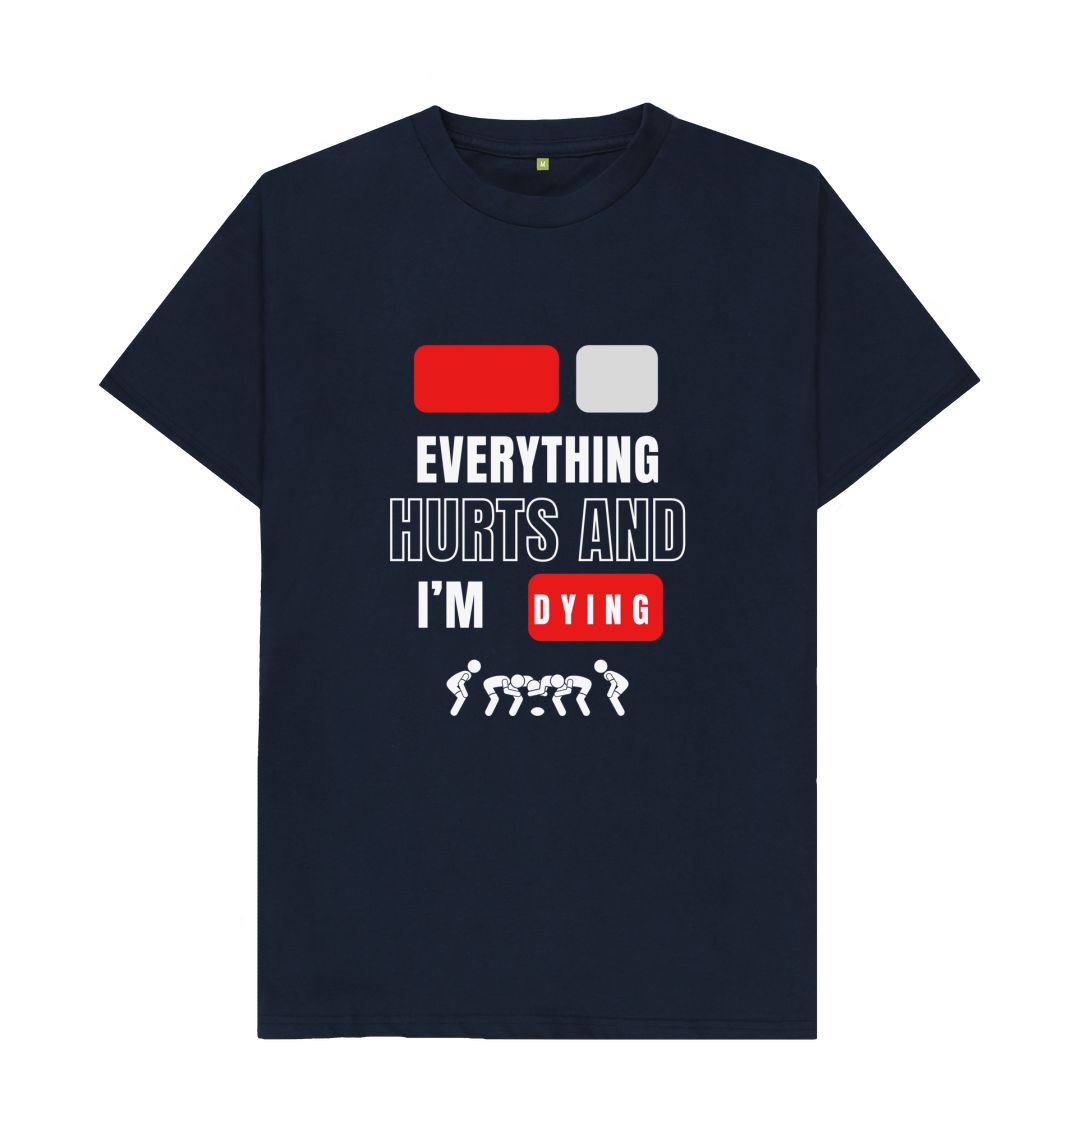 Navy Blue Adults Post game T-Shirt